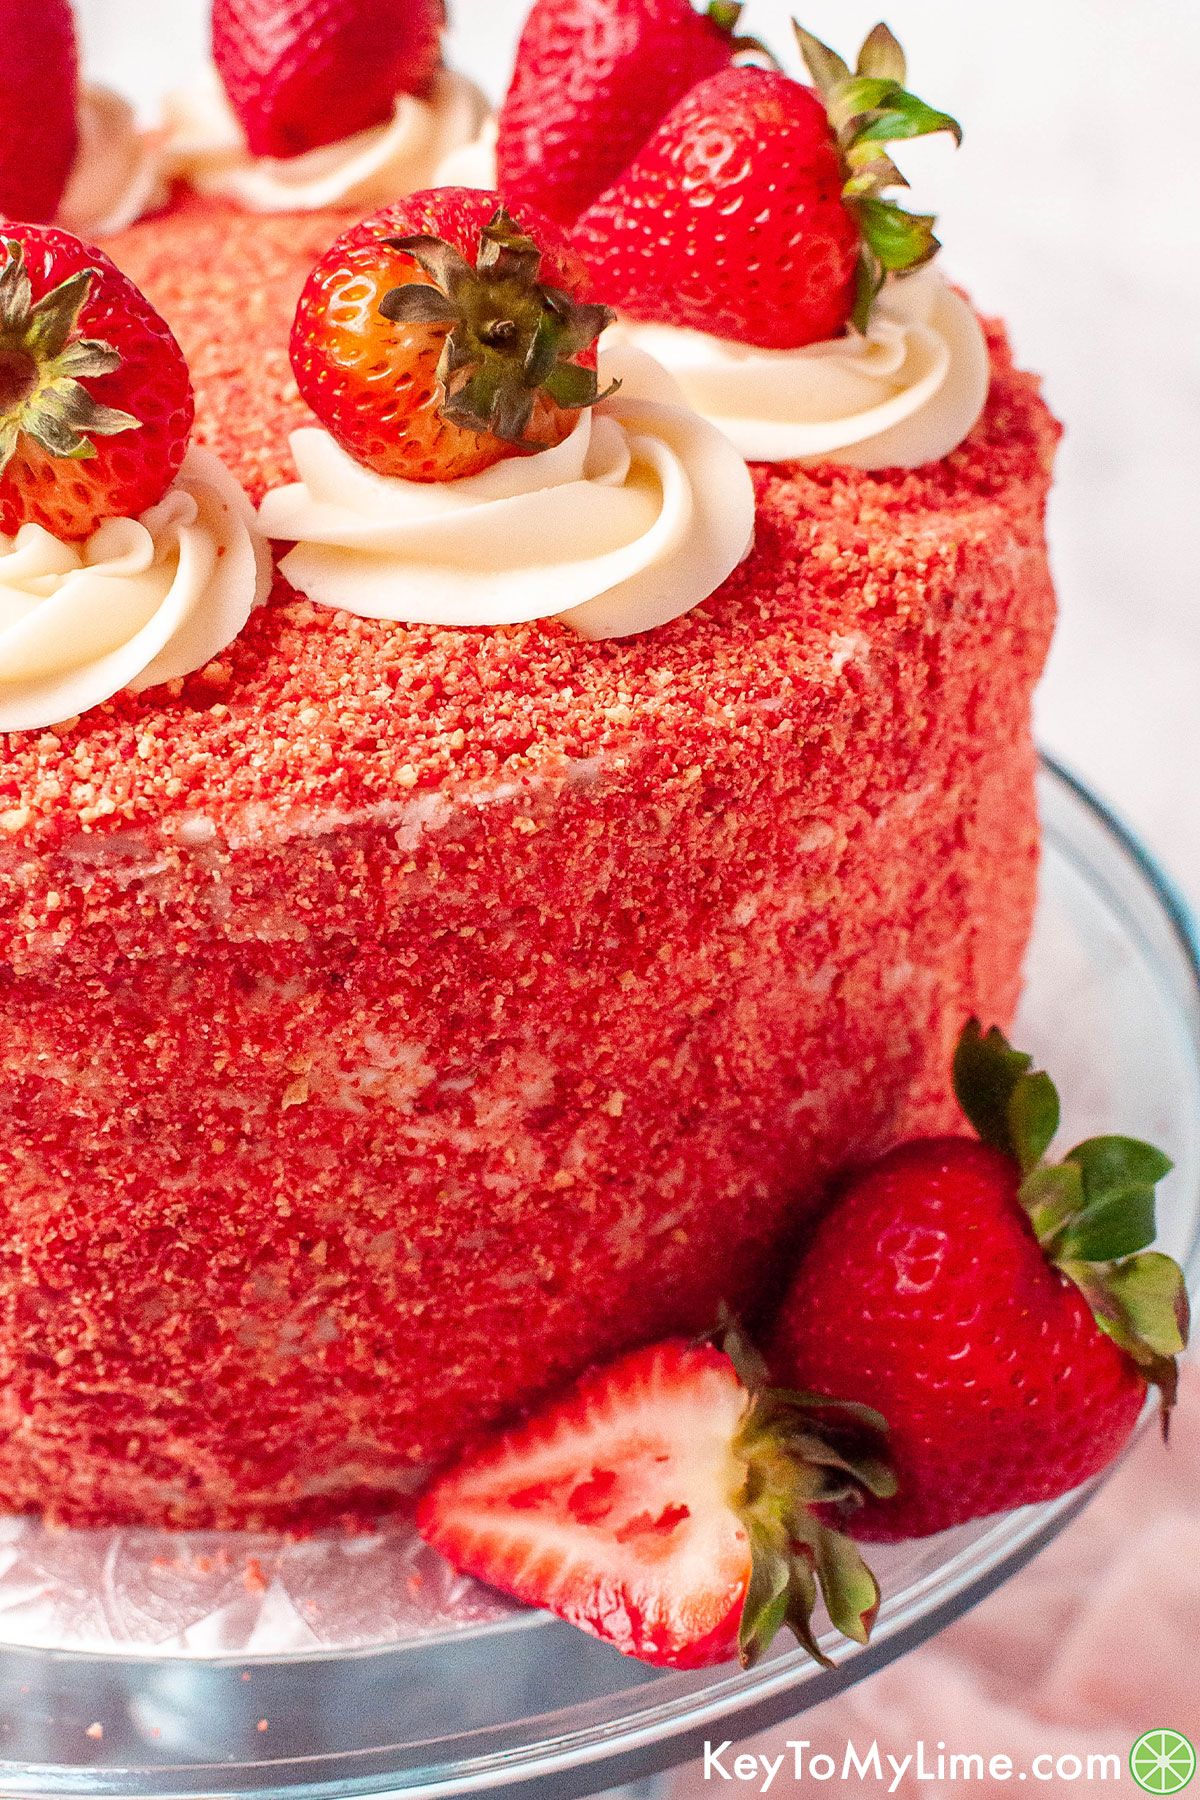 A close up image of a cake decorated with strawberry crunch topping to show the texture.